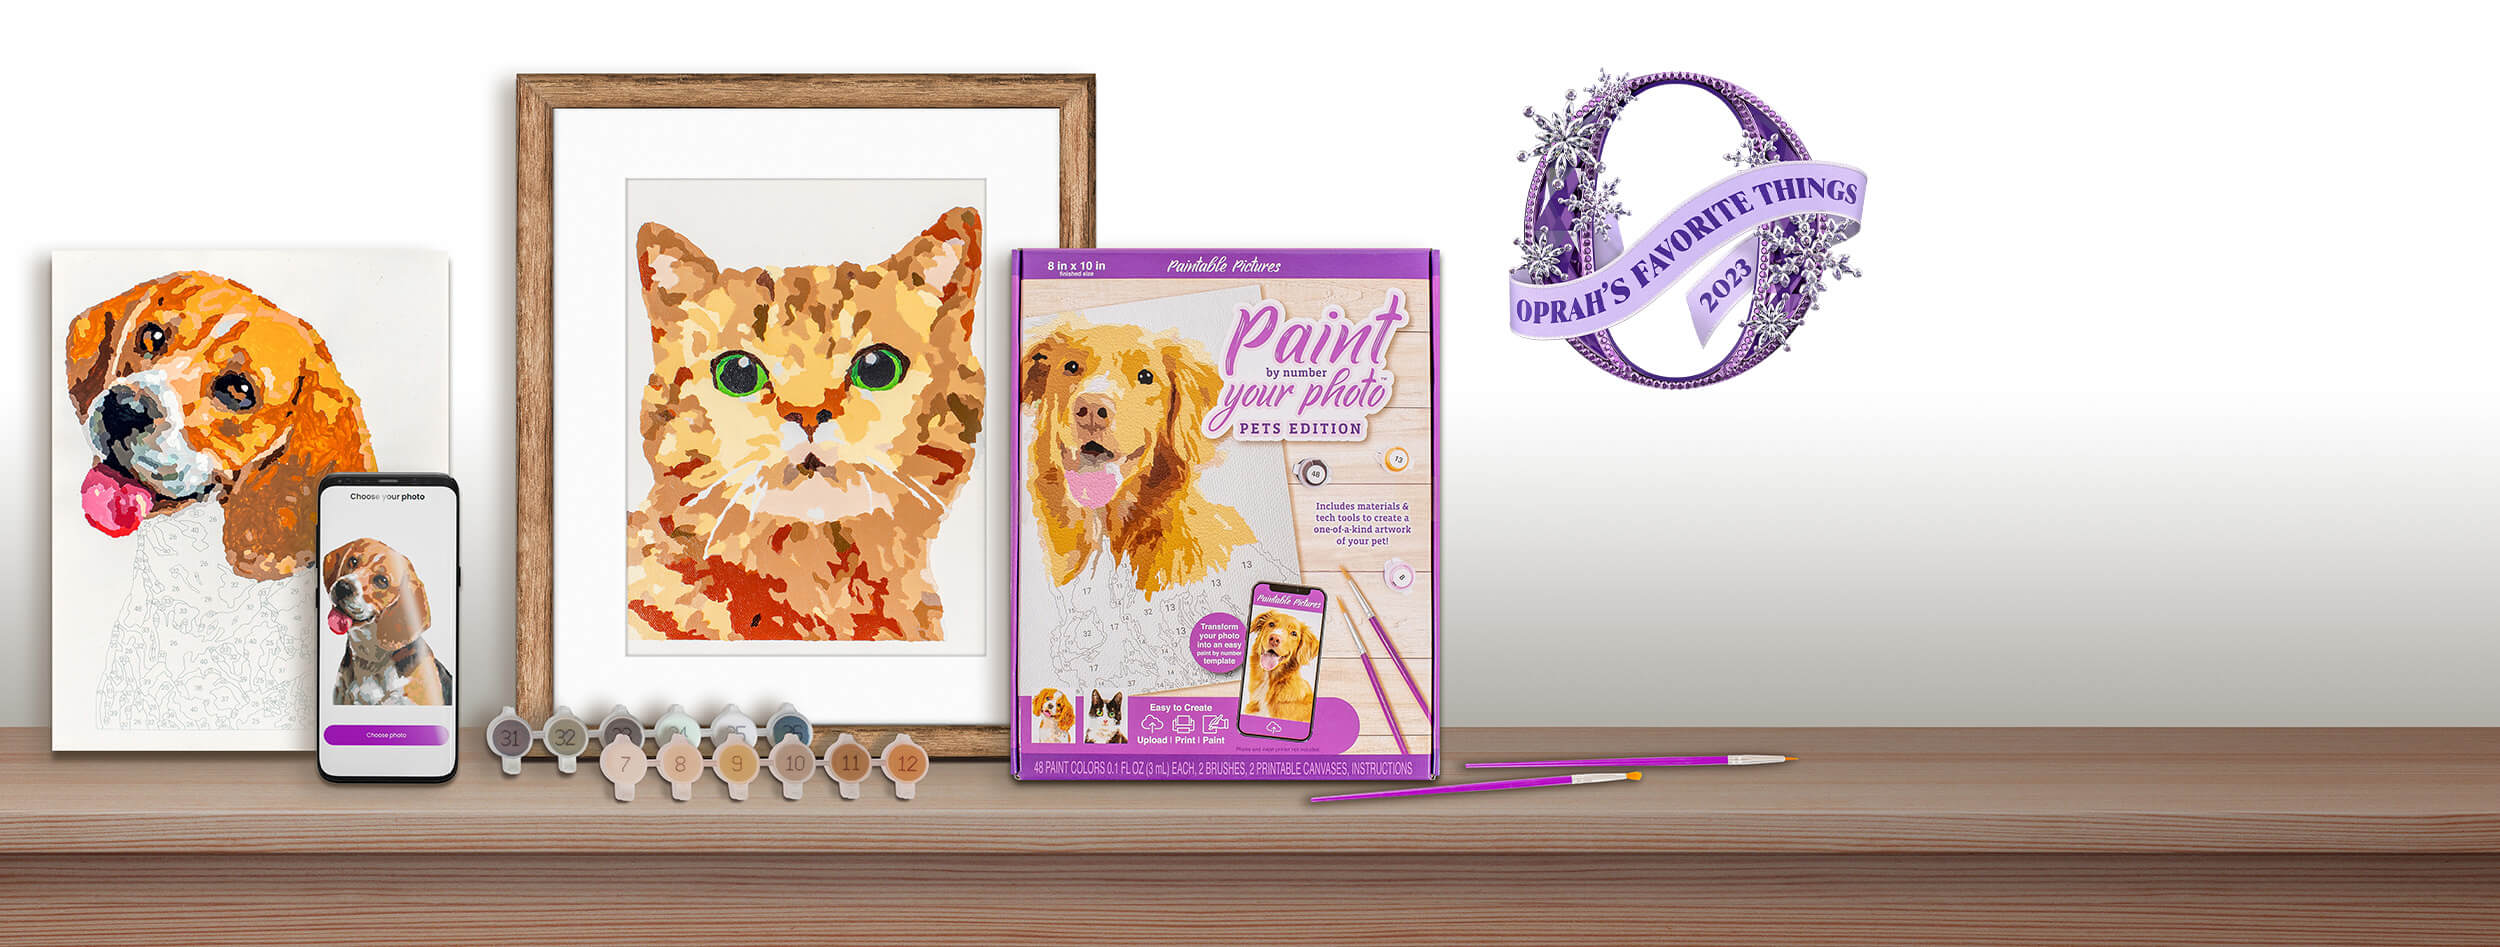 Custom paint by number set featuring a dog portrait, a cat portrait, and a packaged kit with 'Paint Your Photo - Pets Edition' label. The set includes a mobile screen previewing the dog photo, color-coded paints, brushes, and instructions.